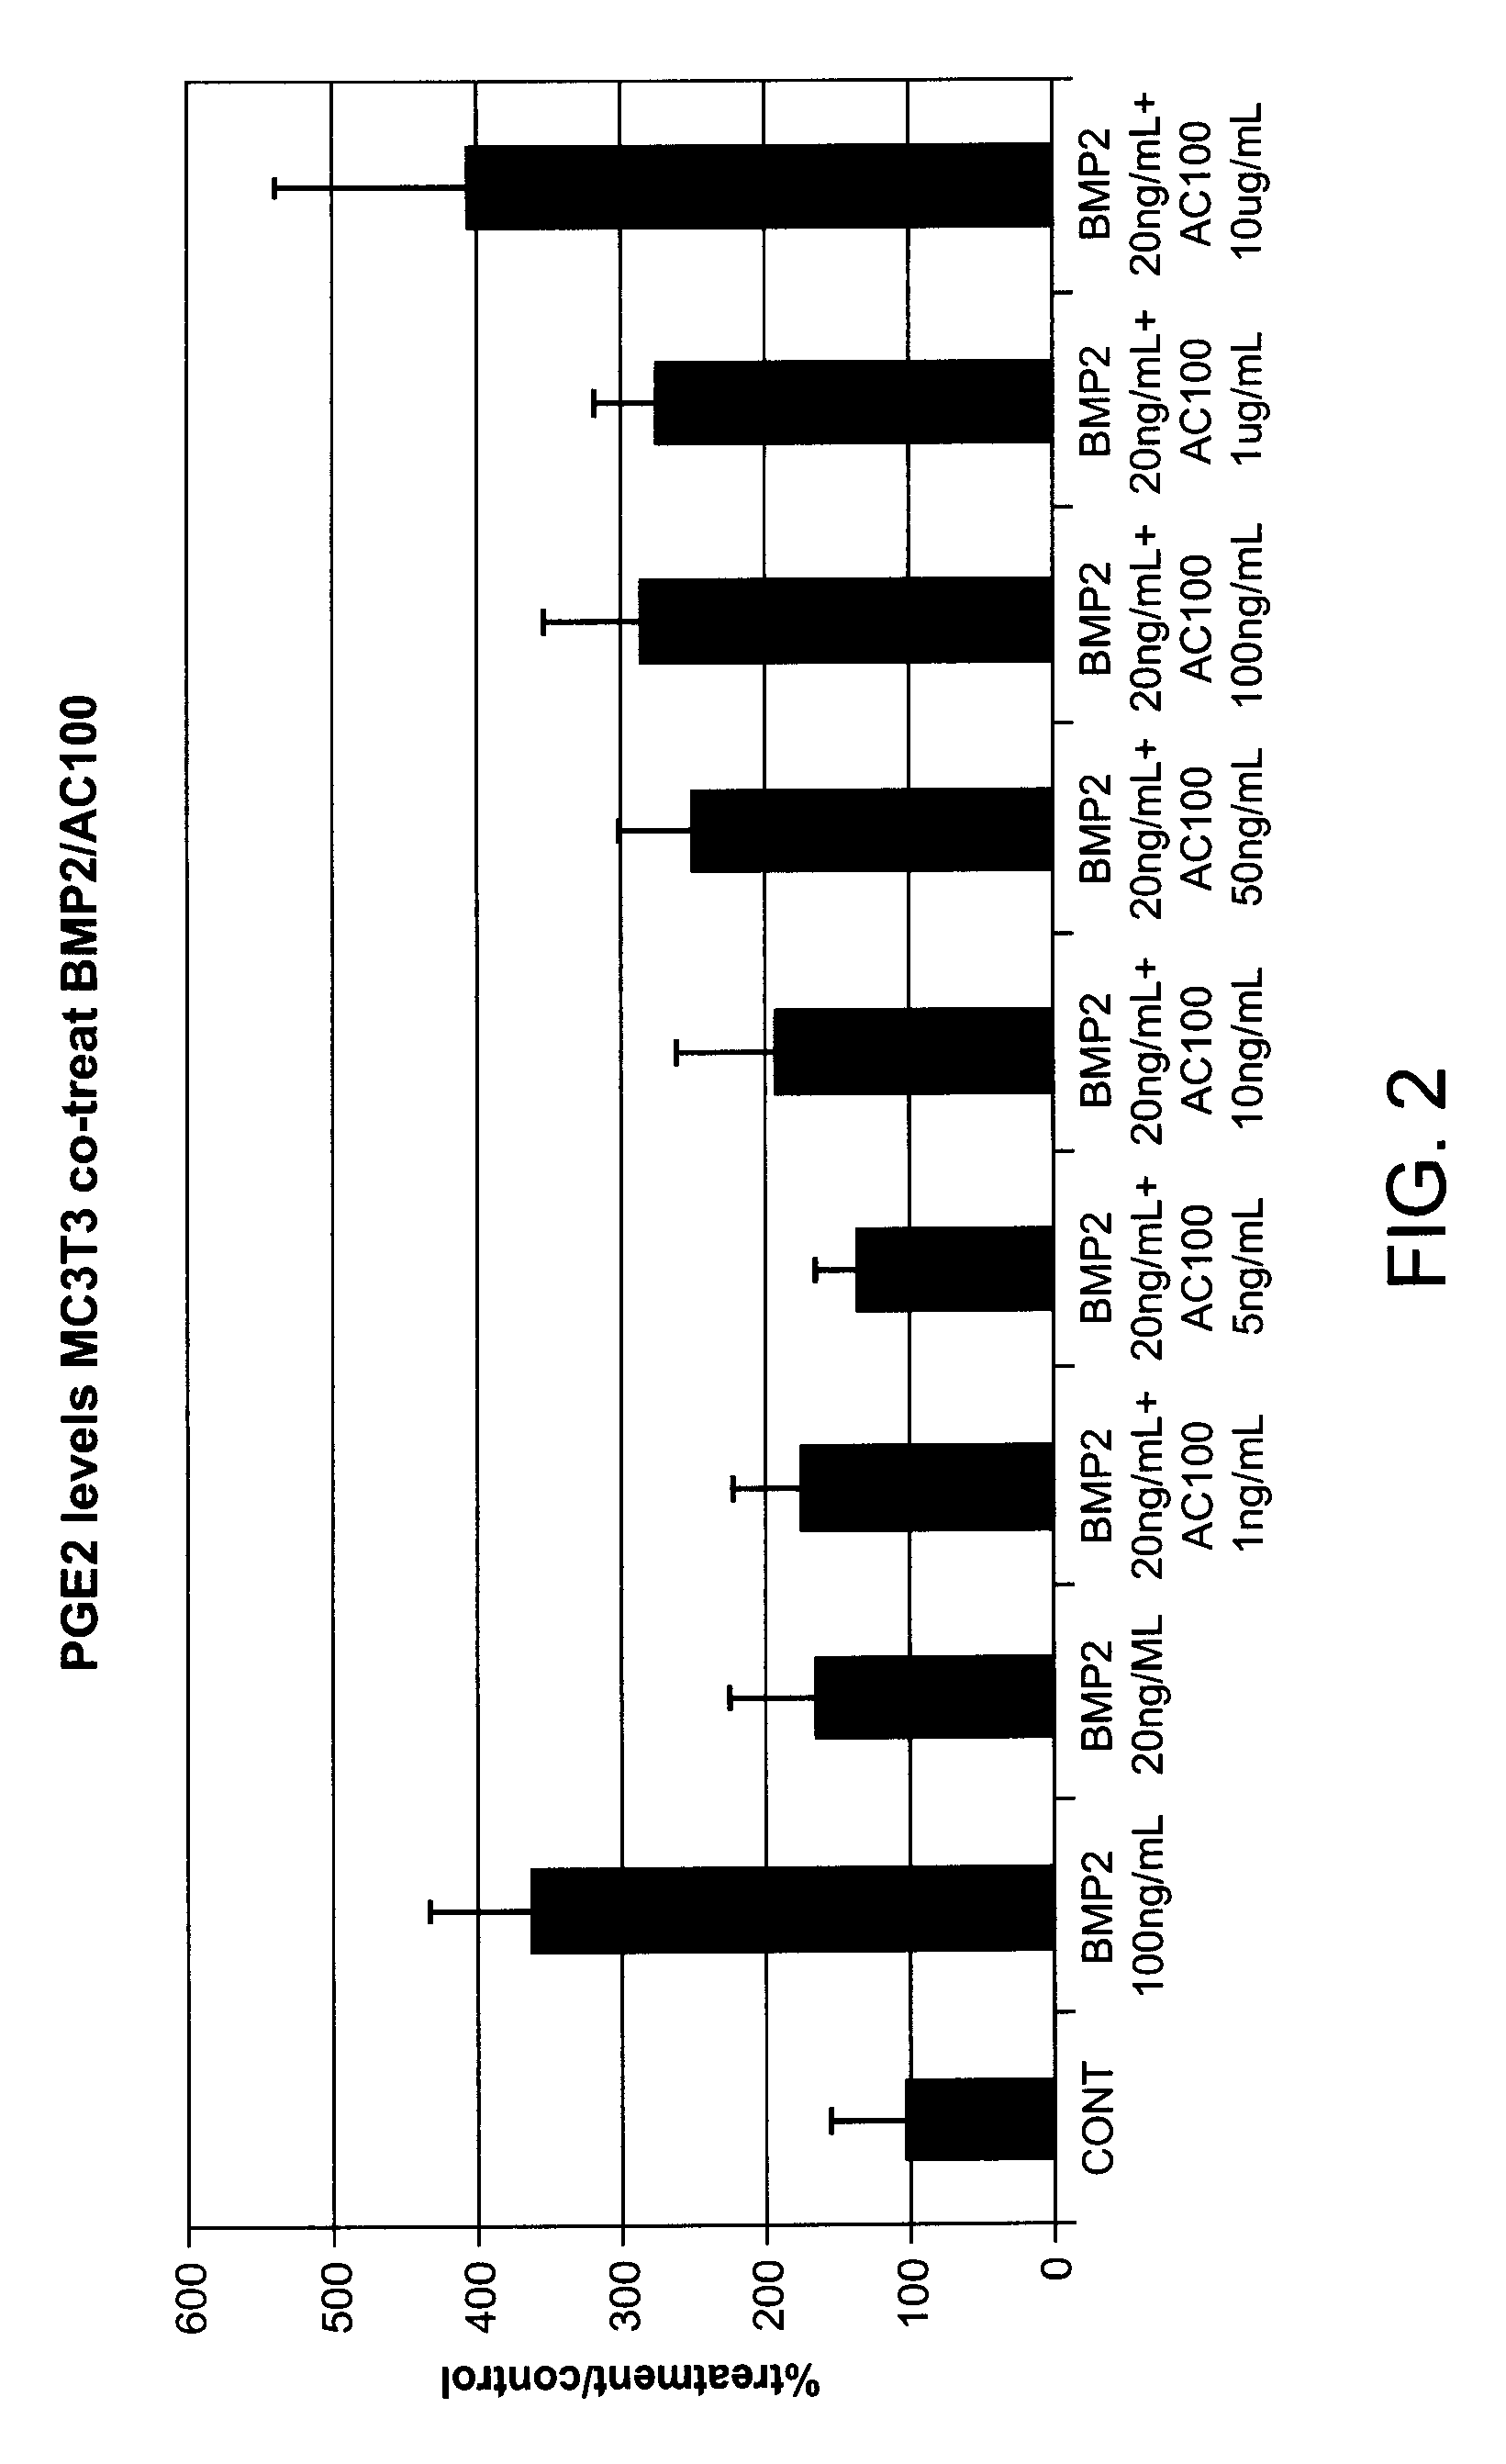 Protein formulation for promoting hard tissue formation